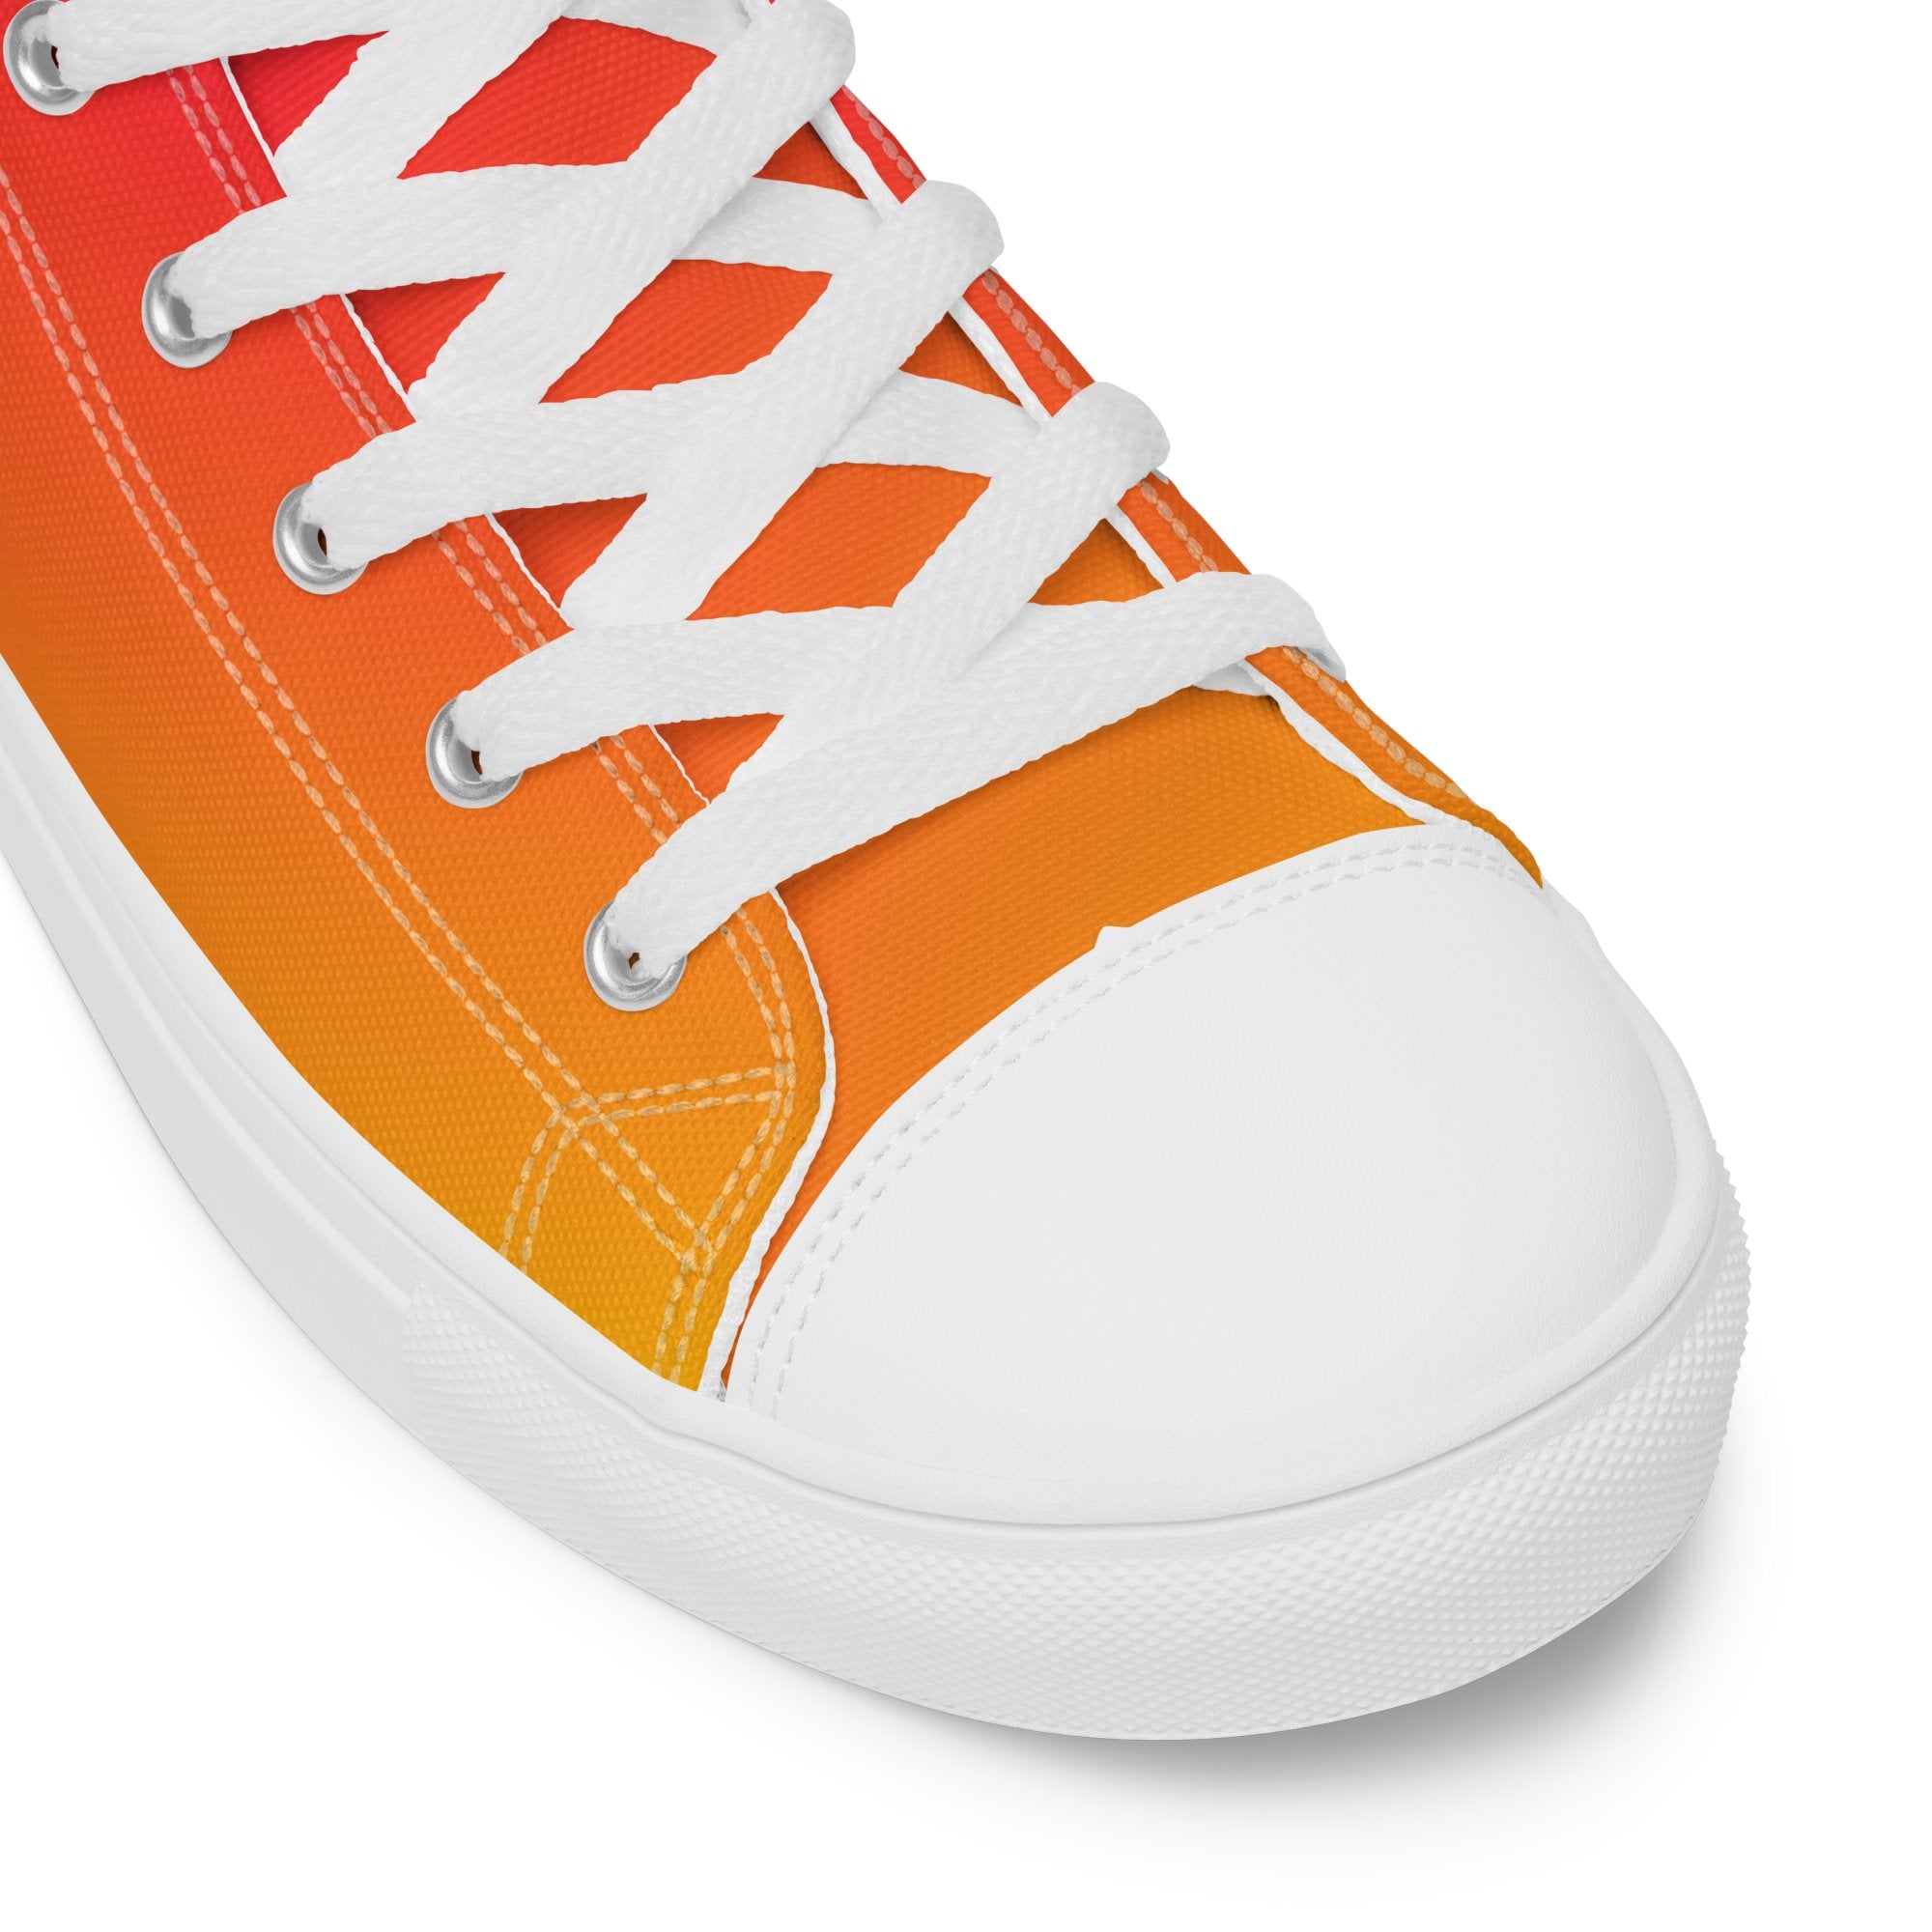 HEX Shoes - high top canvas on The Good Shop Online Store